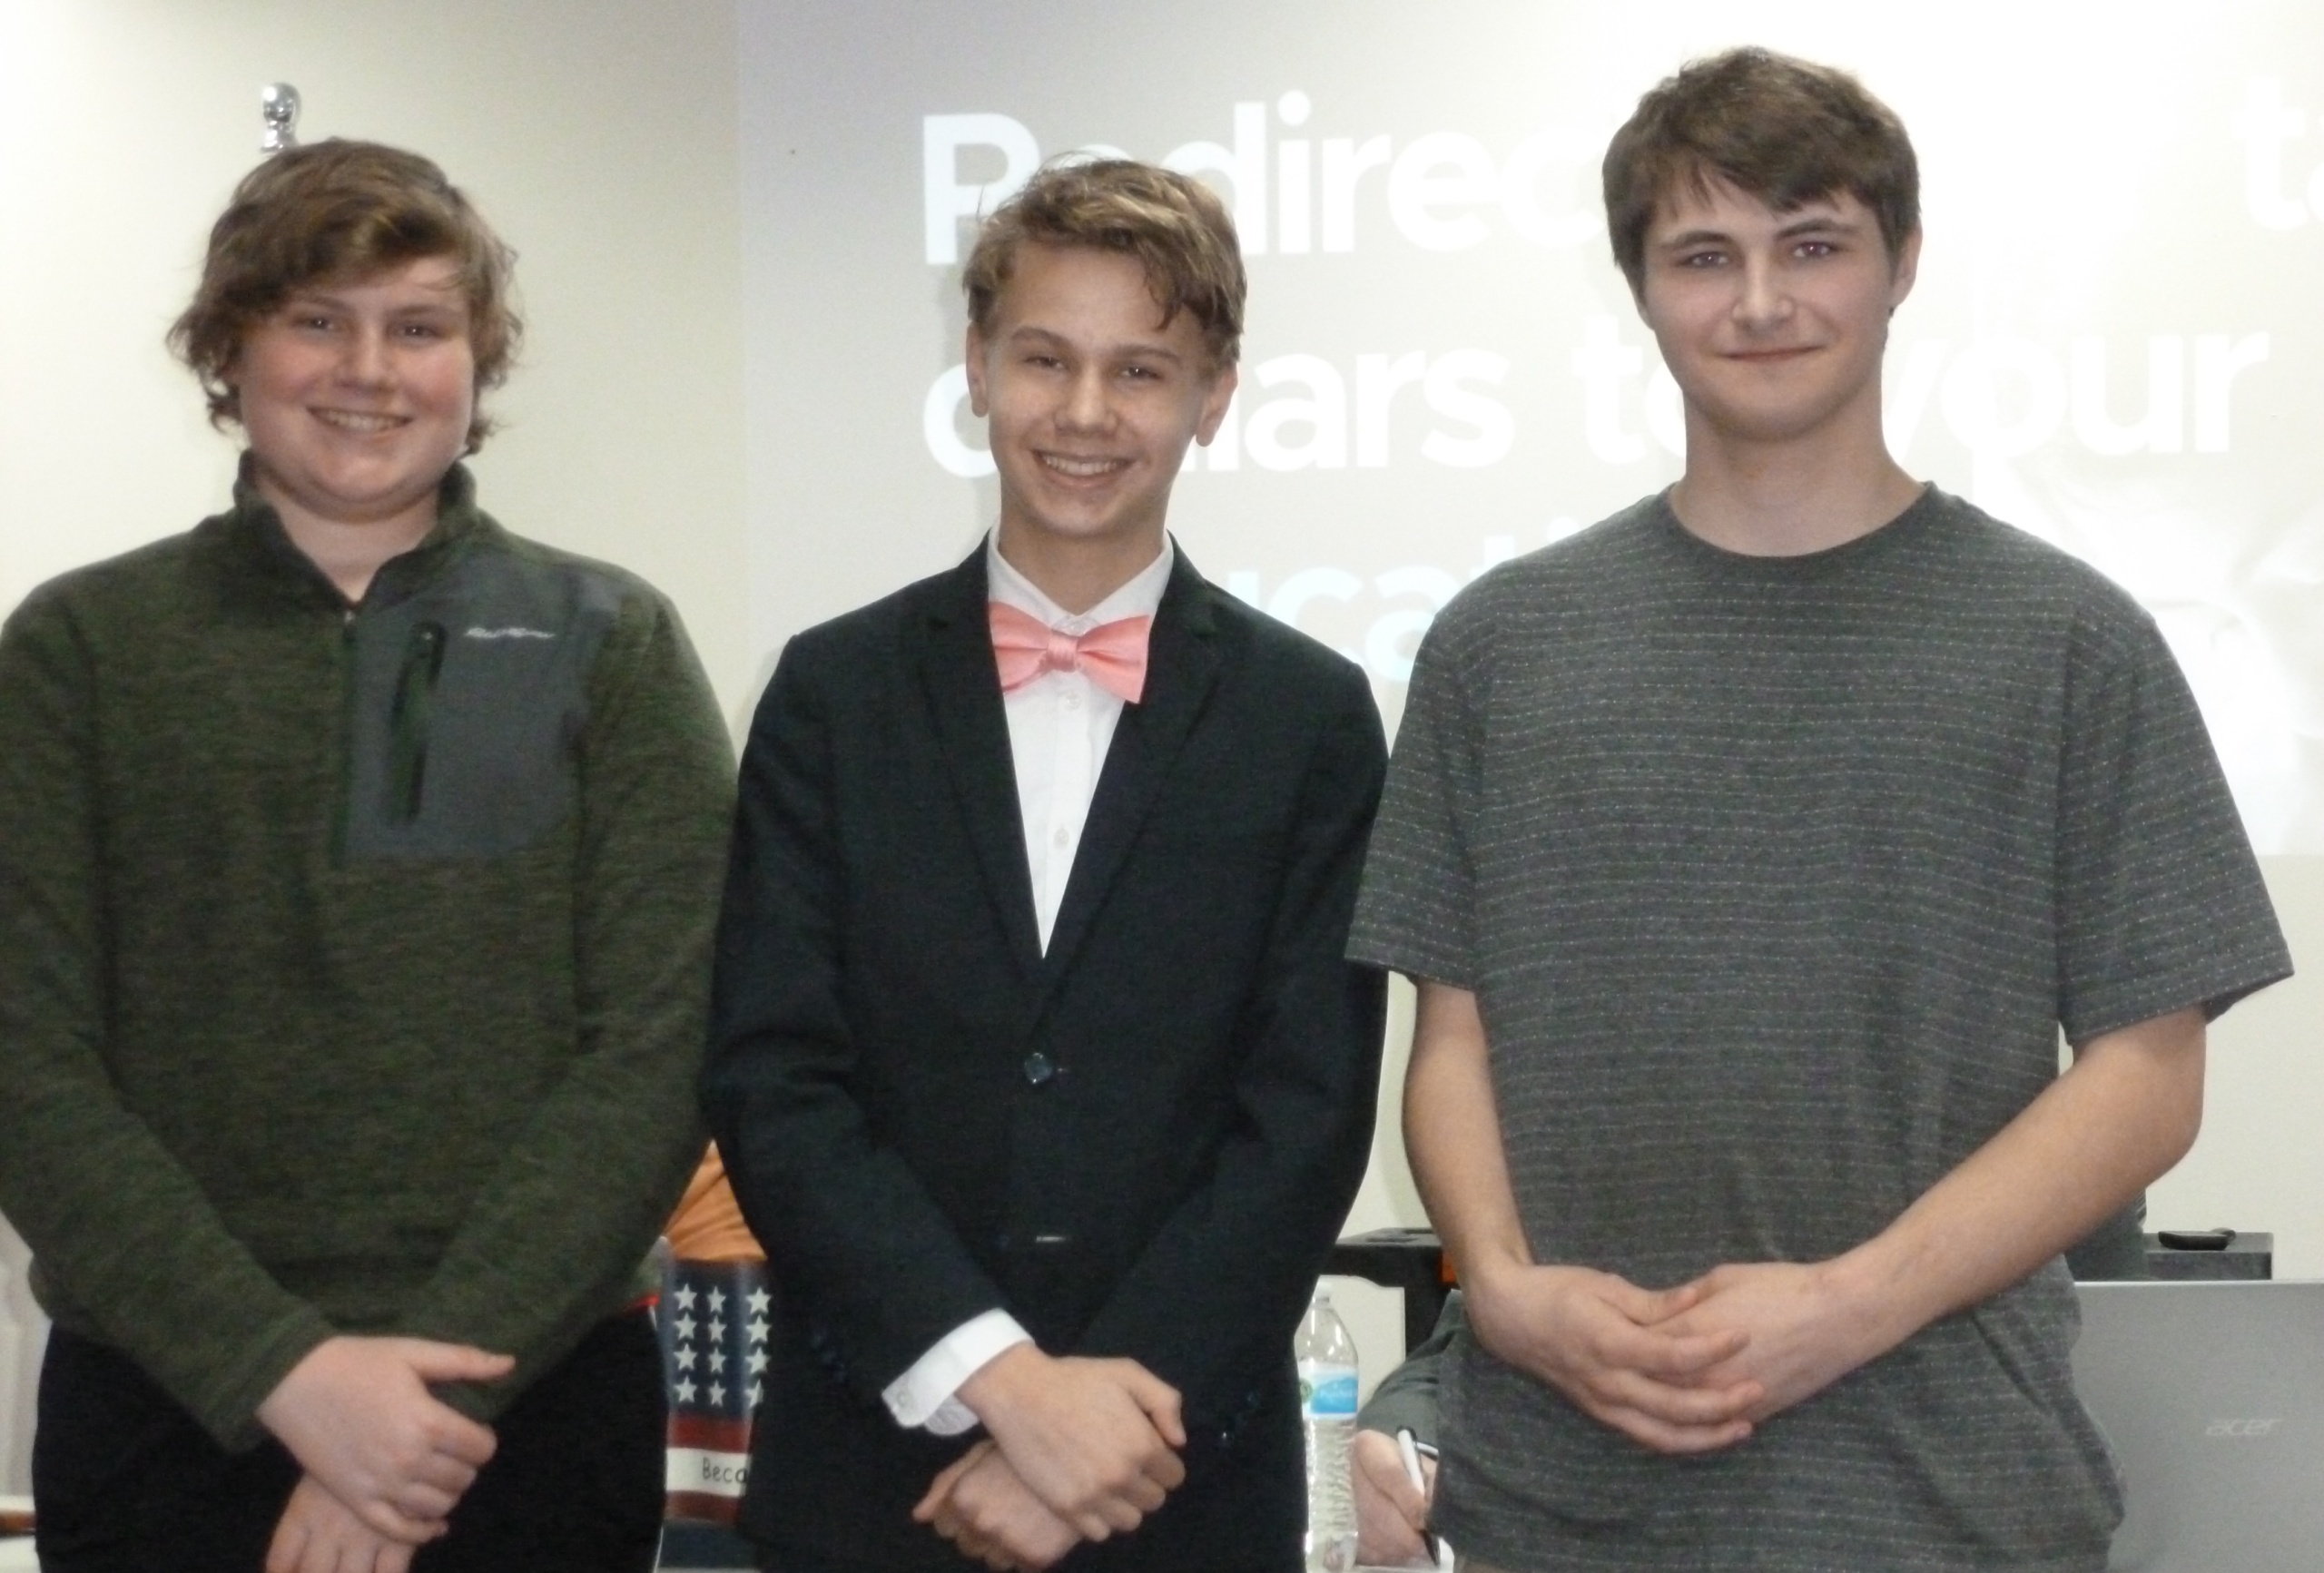 Fox Valley Initiative encourages Jack, Ethan, and Jordan to learn from their experiences at LEAD Wisconsin.